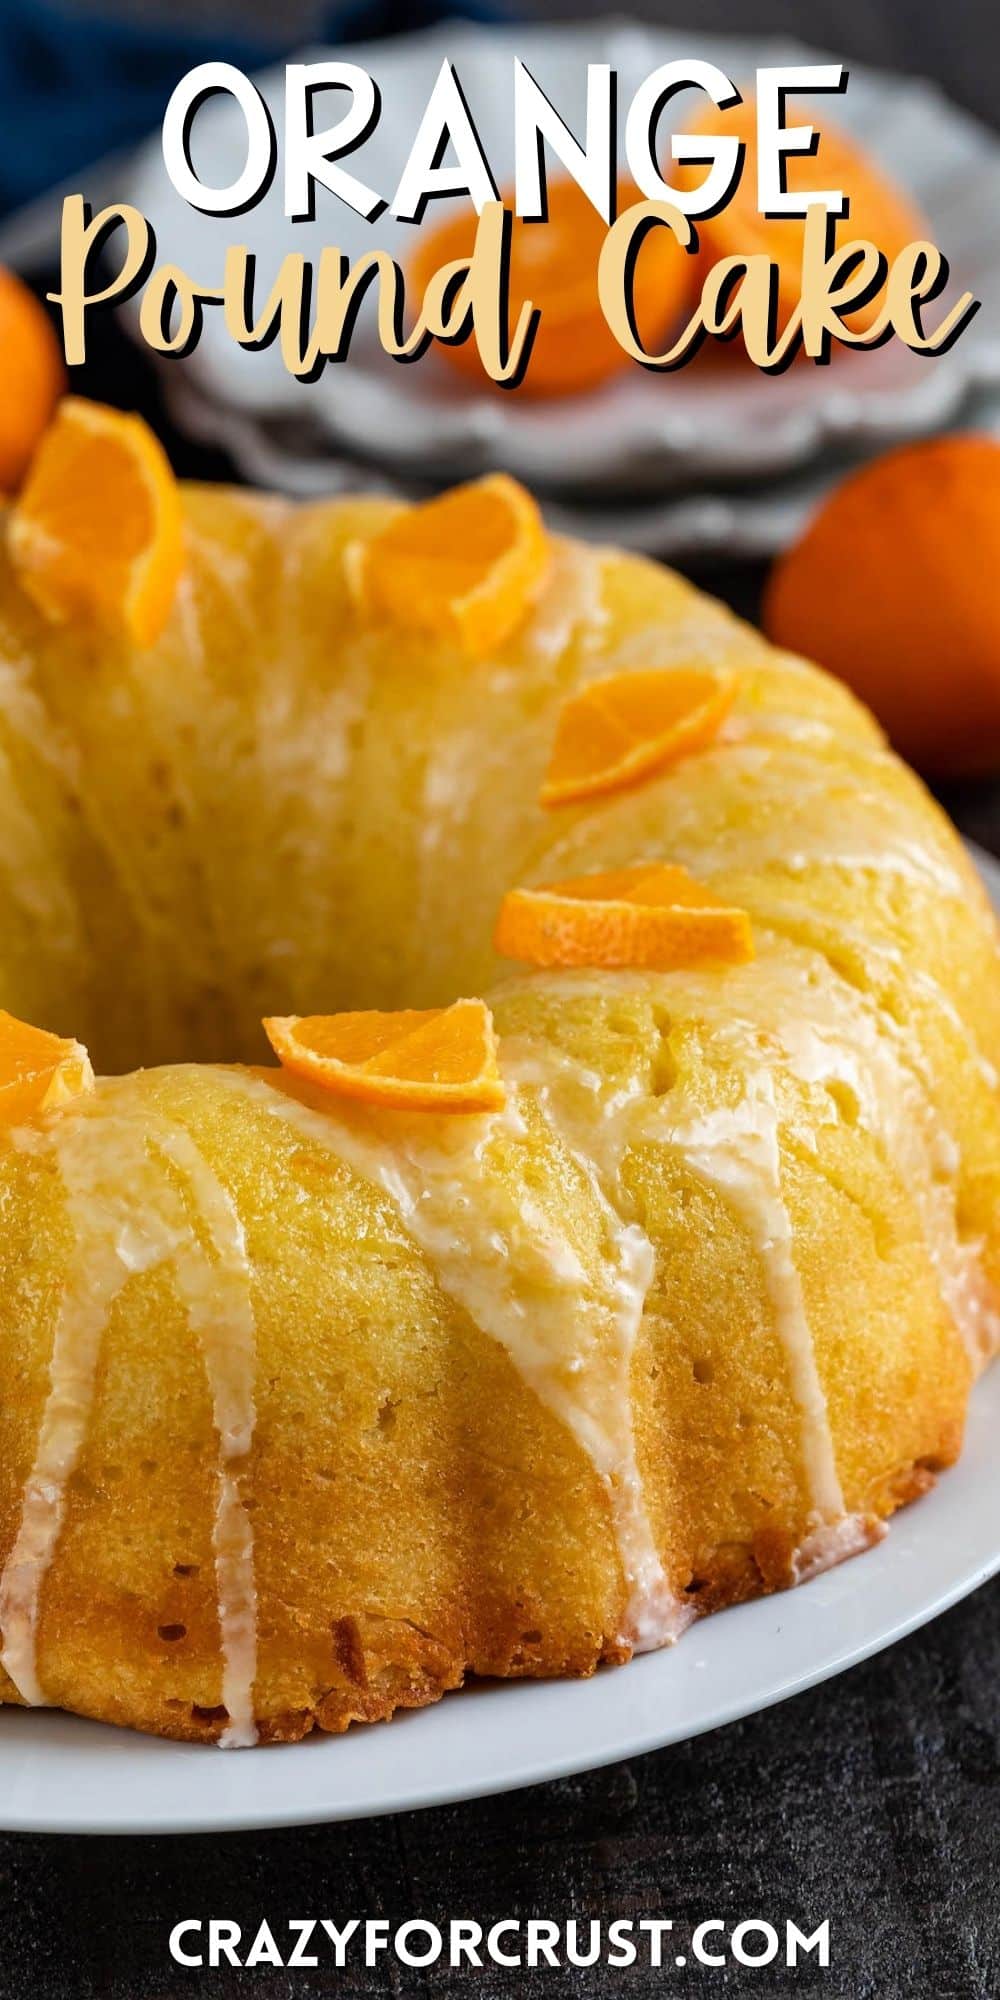 orange bundt cake with sliced oranges and icing on top on a white plate with words on the image.